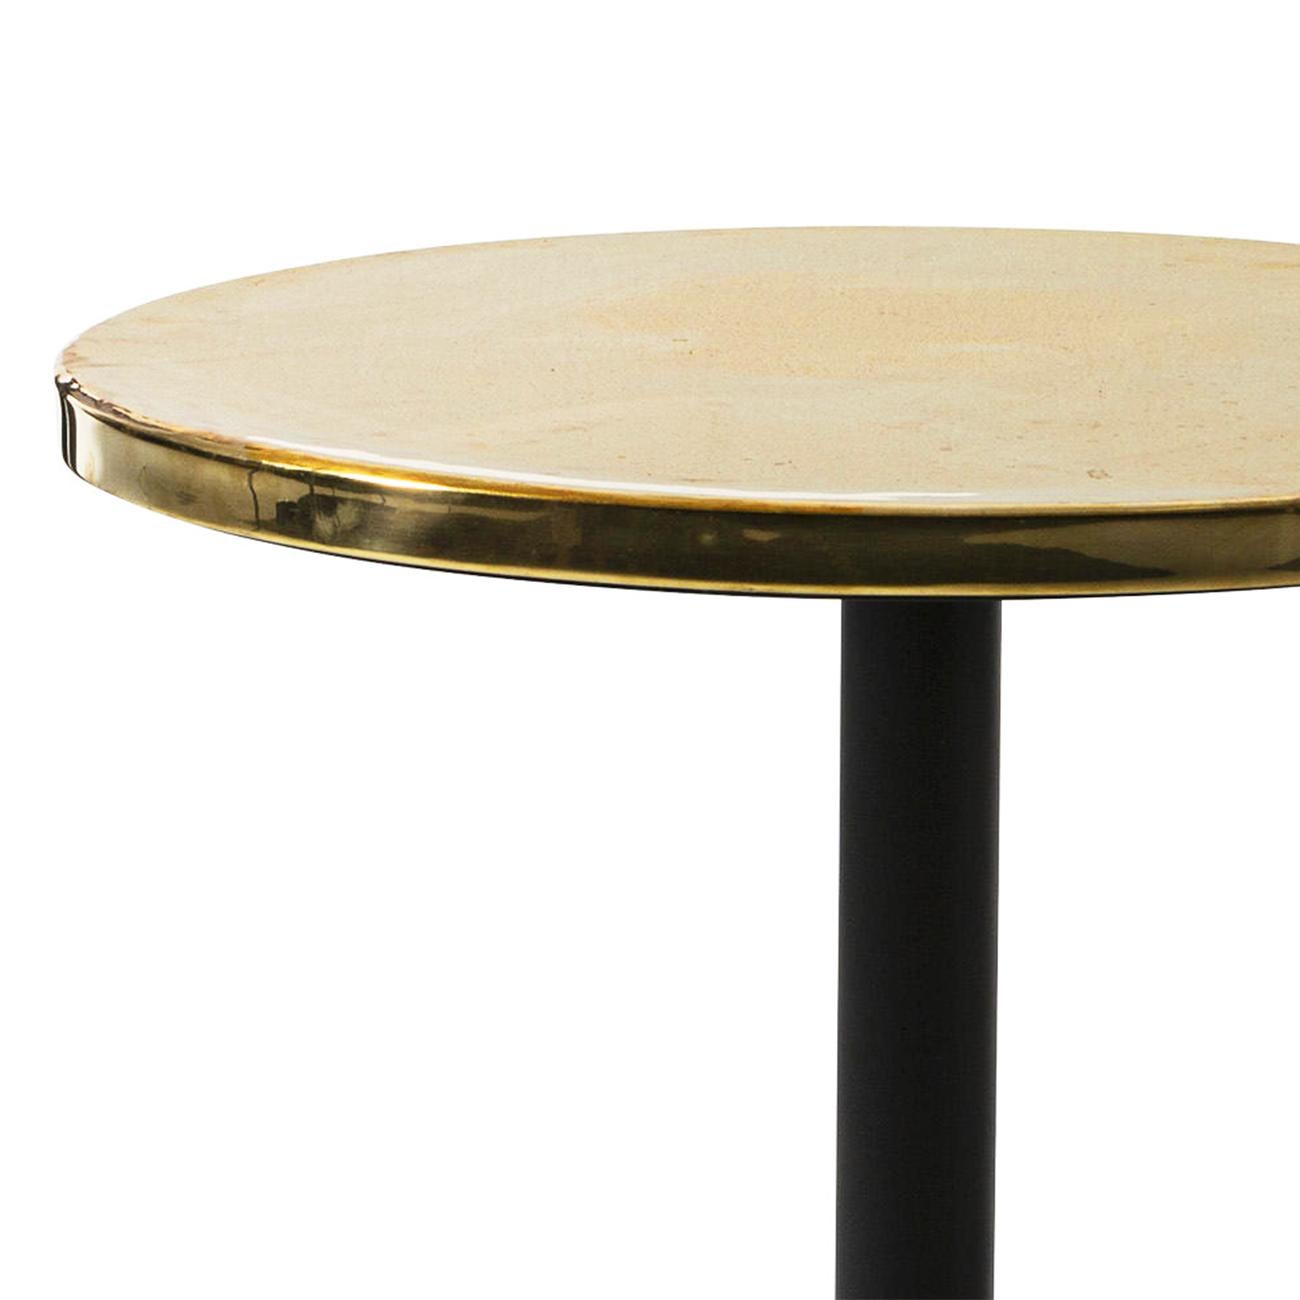 Round Table Shiny with casted iron base in black finish,
with wooden column base in black finish and with polished
glossy brass top.